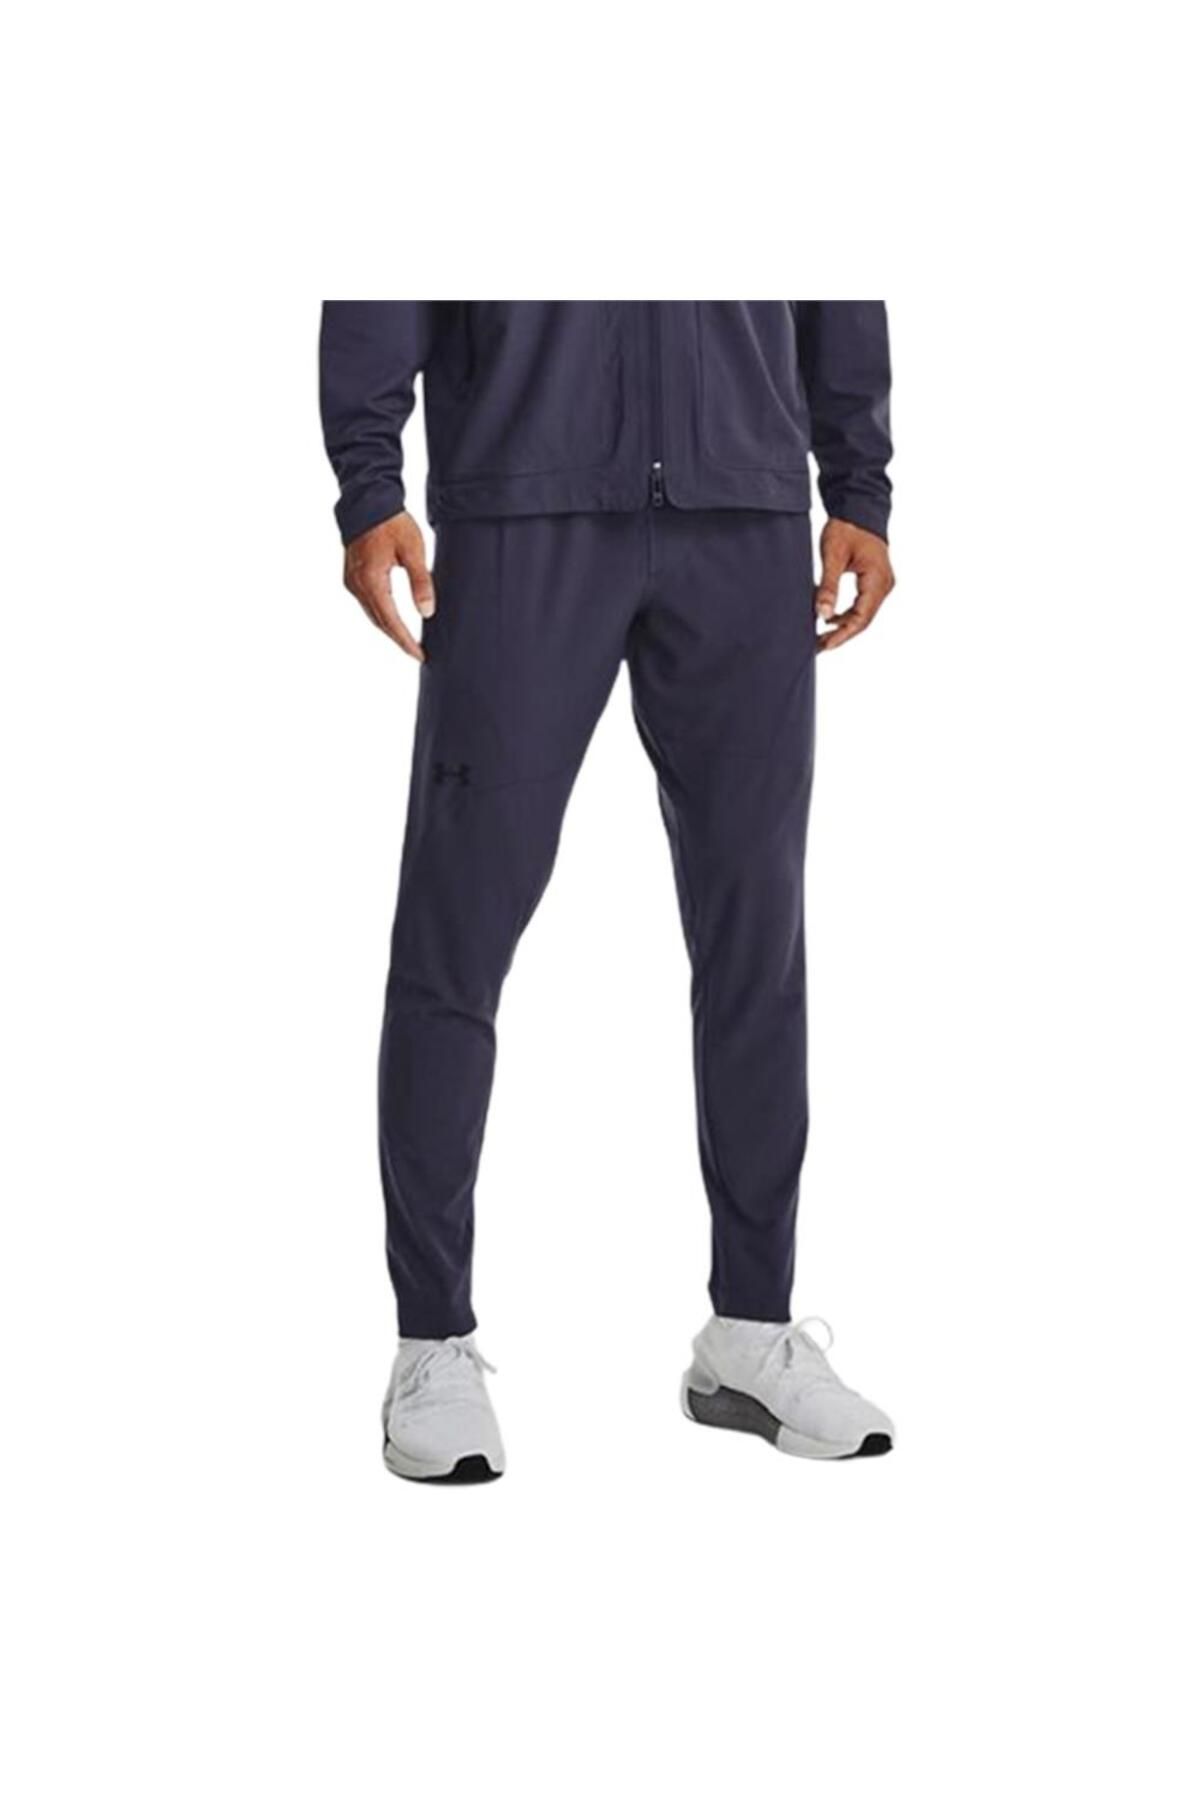 Under Armour Ua Unstoppable Tapered Pant